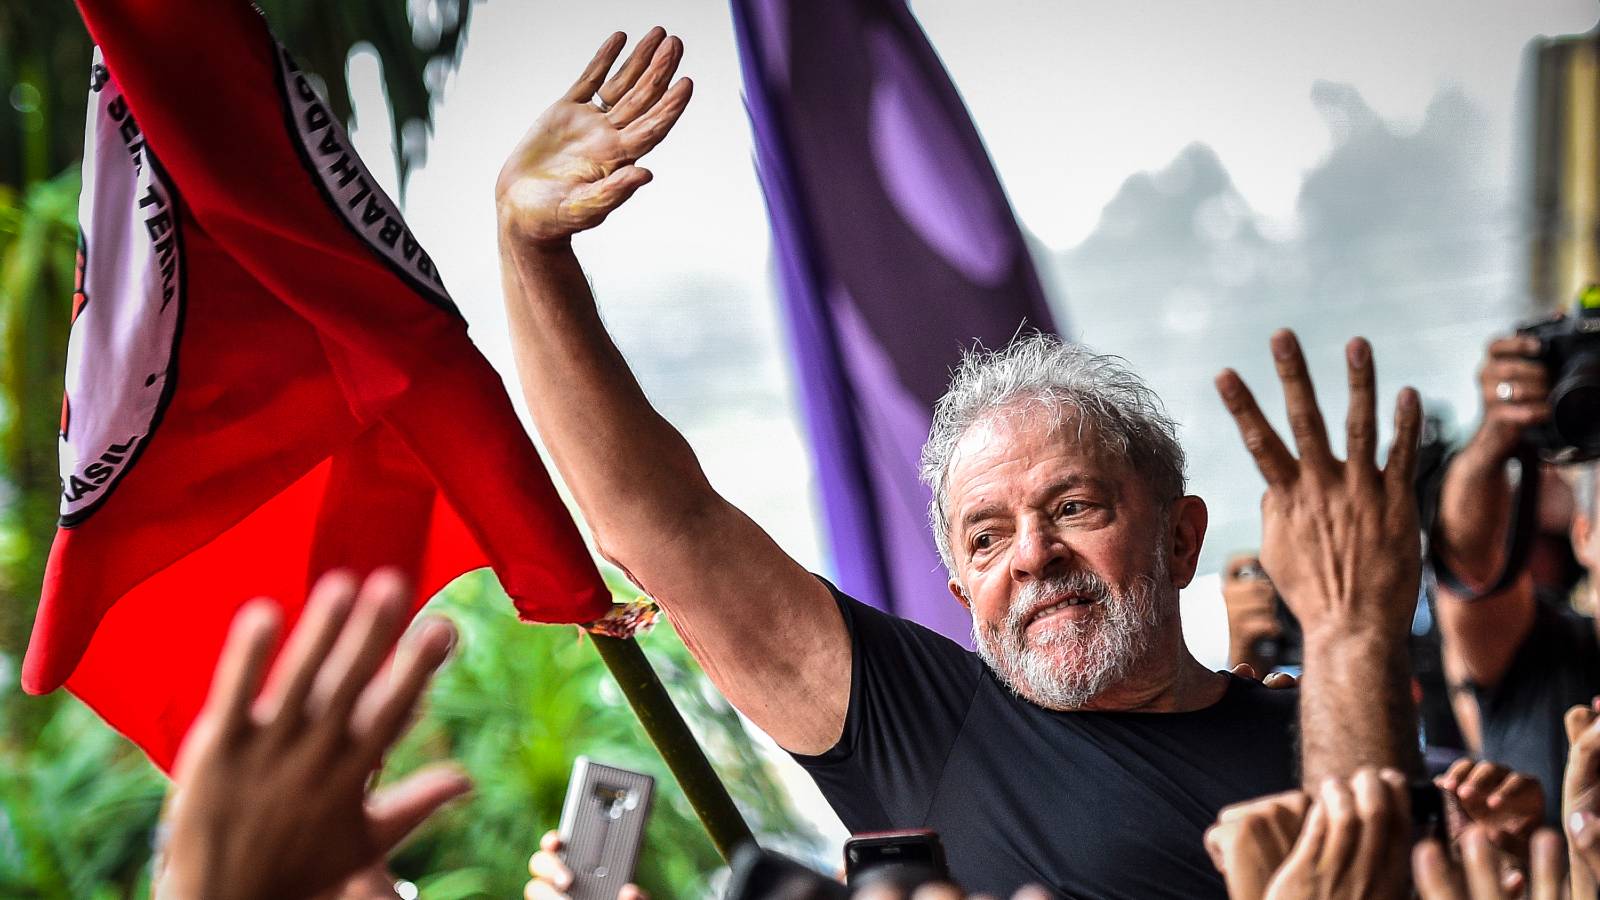 lula waves in front of flags with hands raising waving back at him